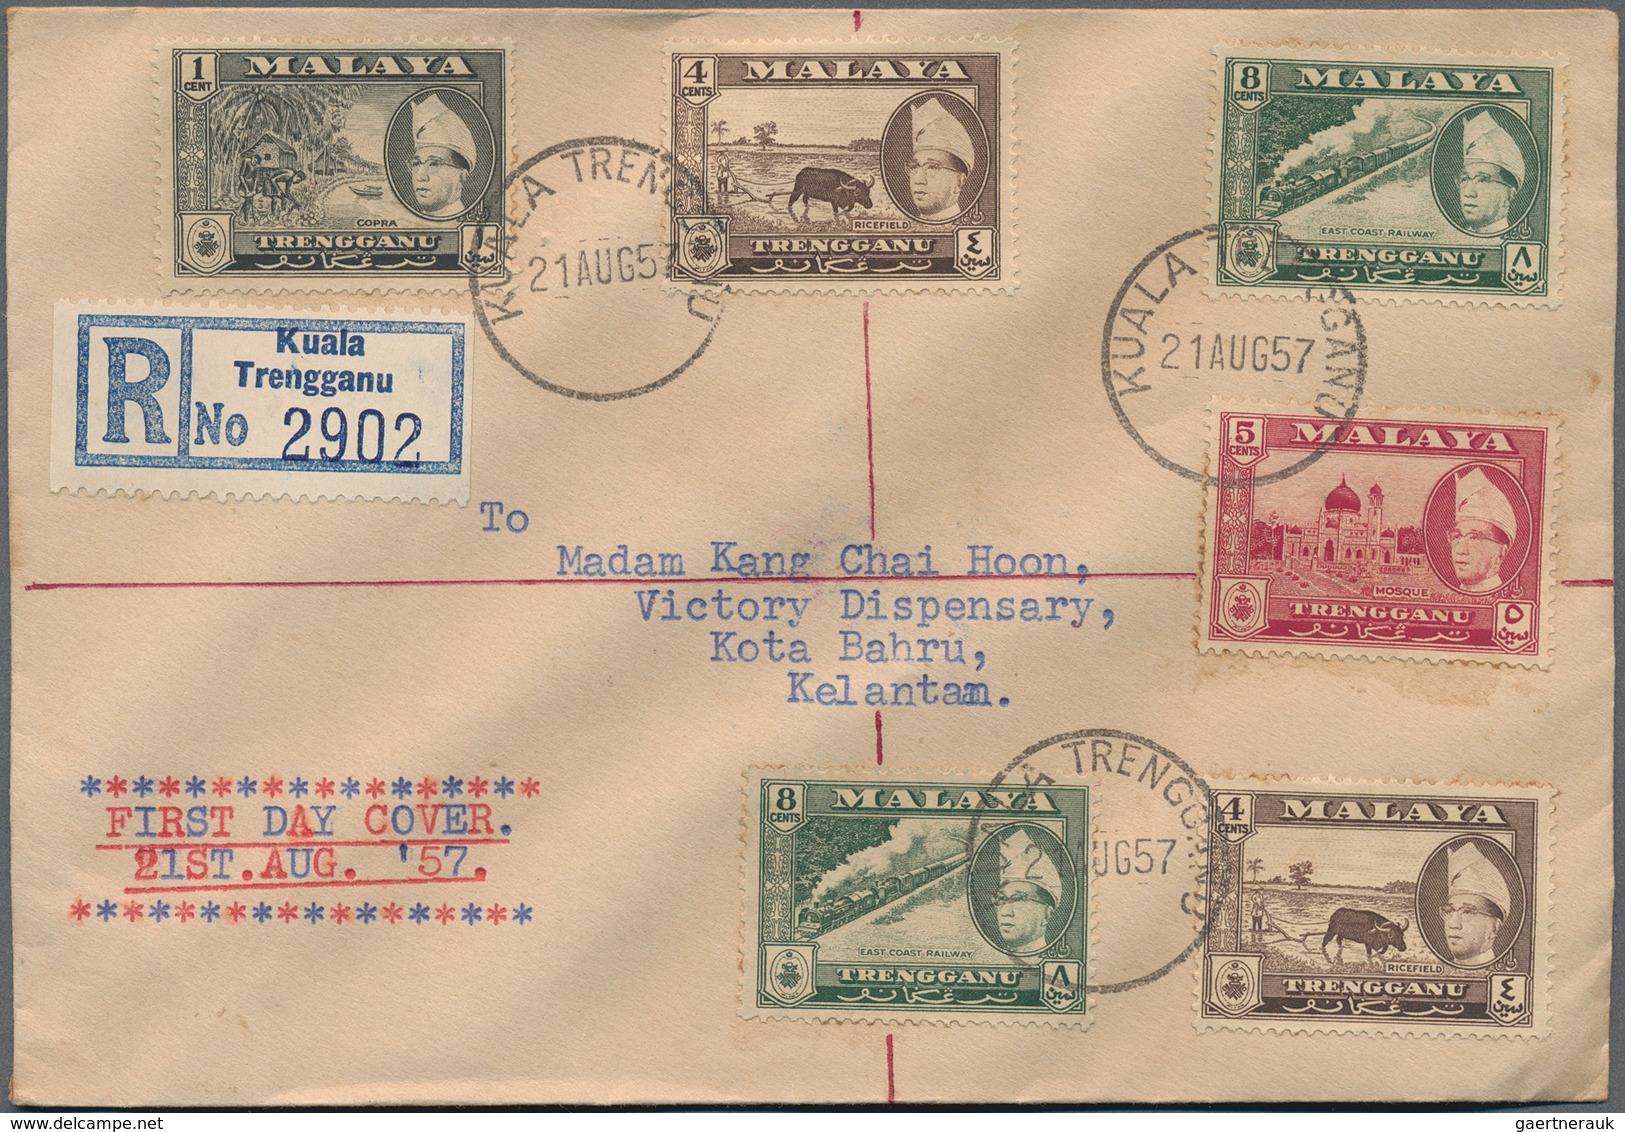 29500 Malaiische Staaten: 1940's-1970's: About 350 Covers, Postcards, FDCs And Postal Stationery Items Fro - Federated Malay States